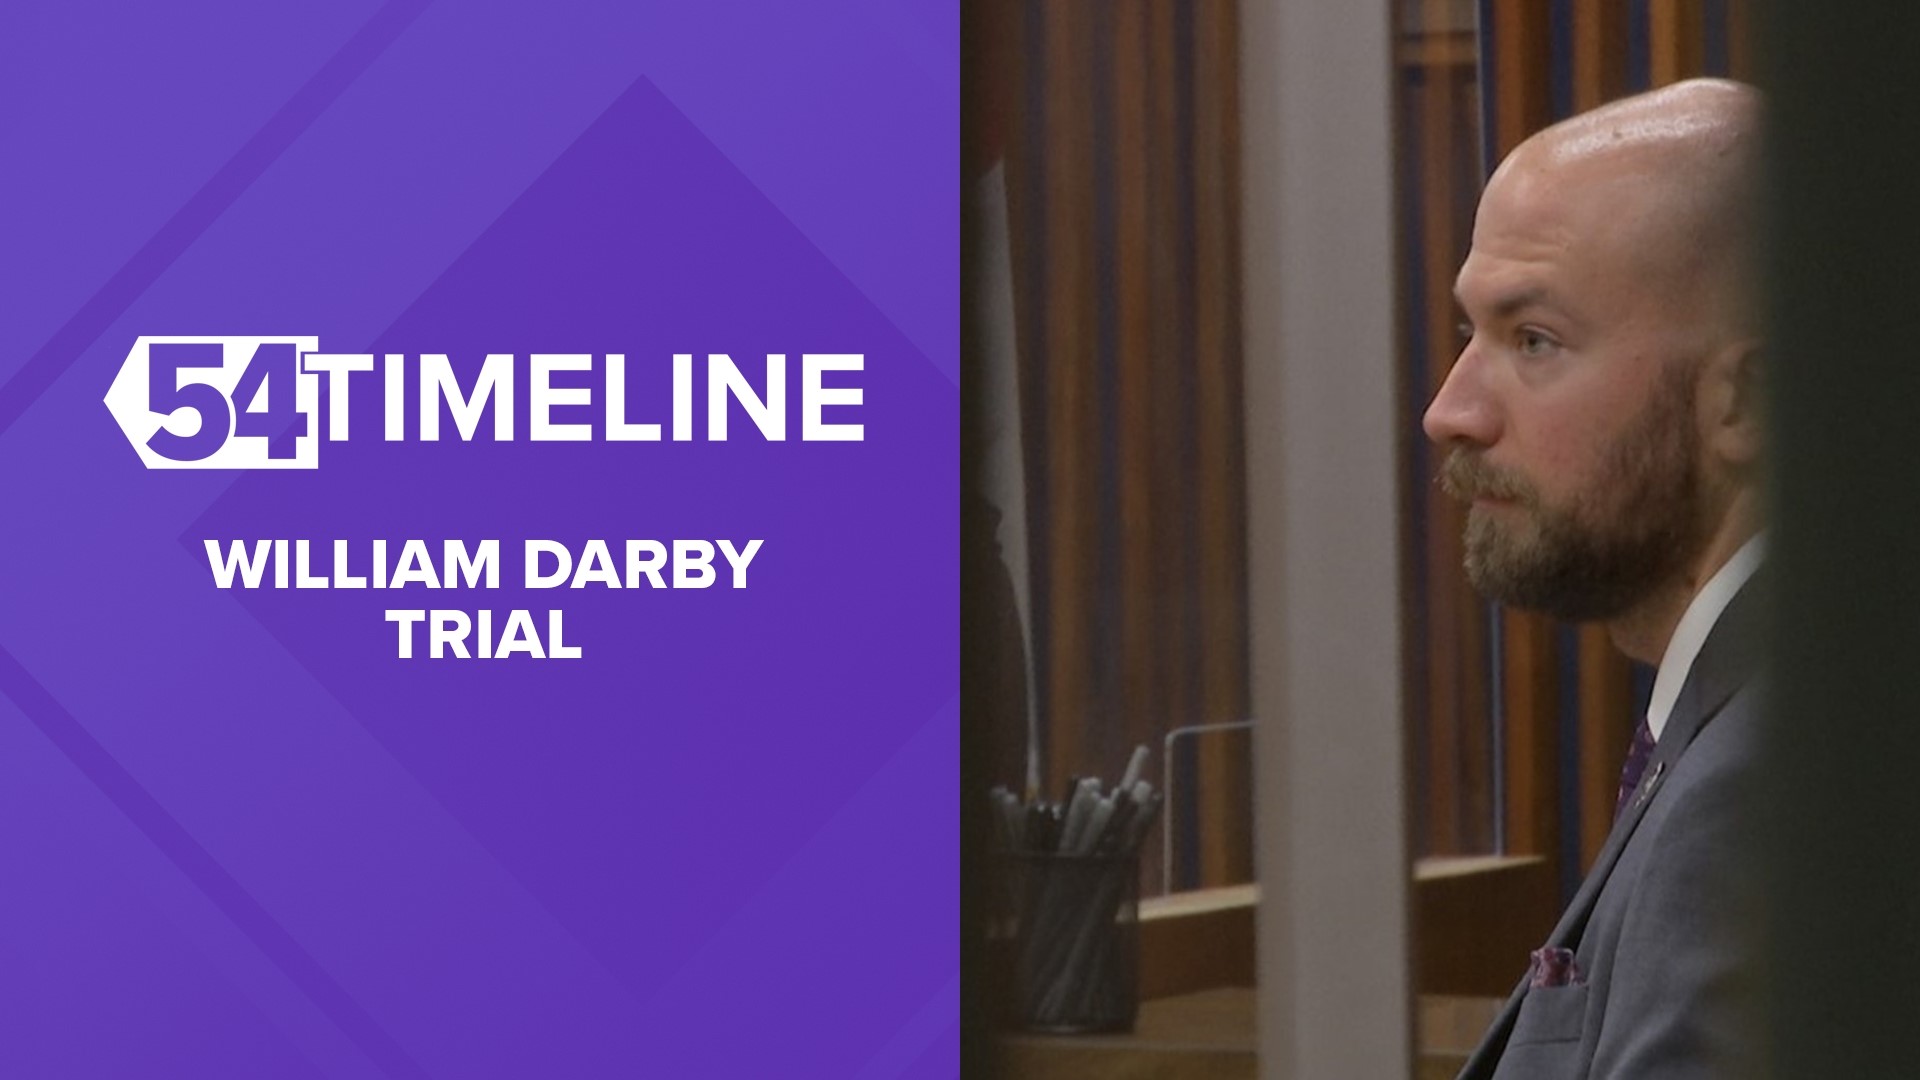 On March 24, 2023, an Alabama appellate court tossed the murder conviction of William Darby, a Huntsville police officer who shot a man who had threatened suicide.